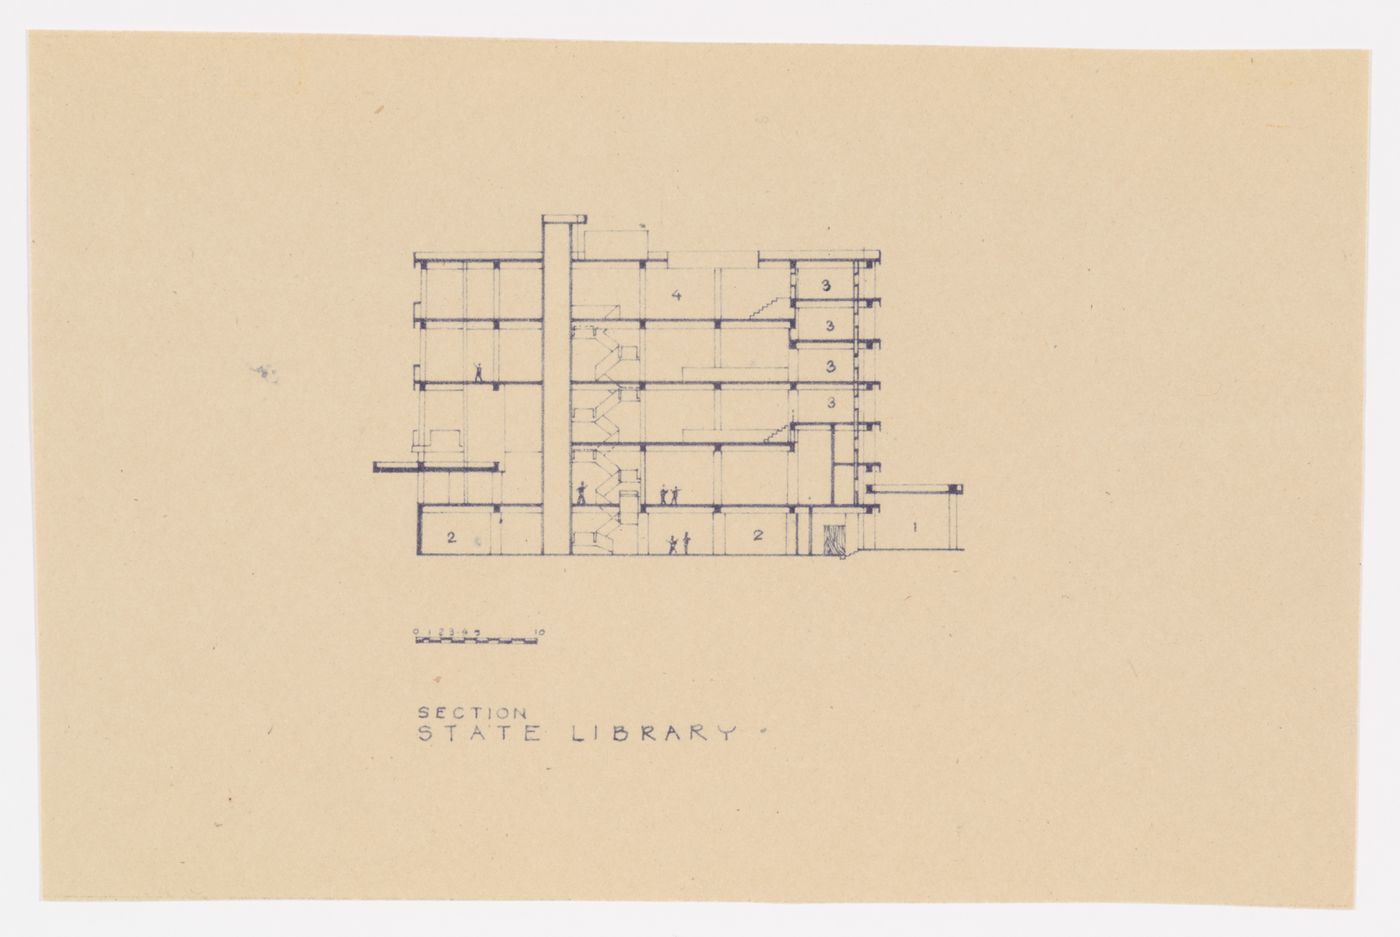 Section for the State Library in sector 17 in Chandigarh, India